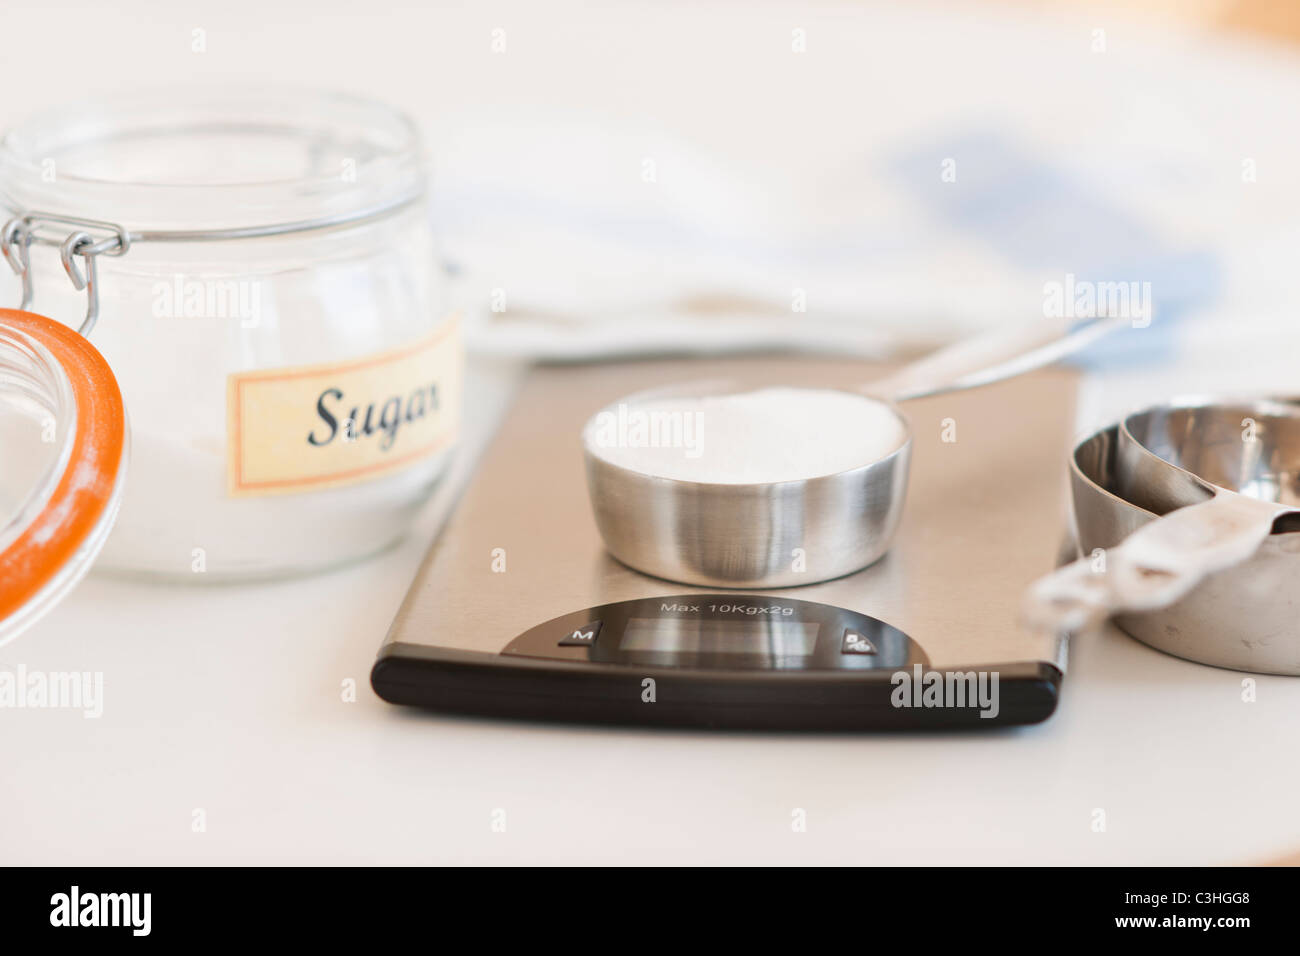 Spoon of sugar on weight scale Stock Photo